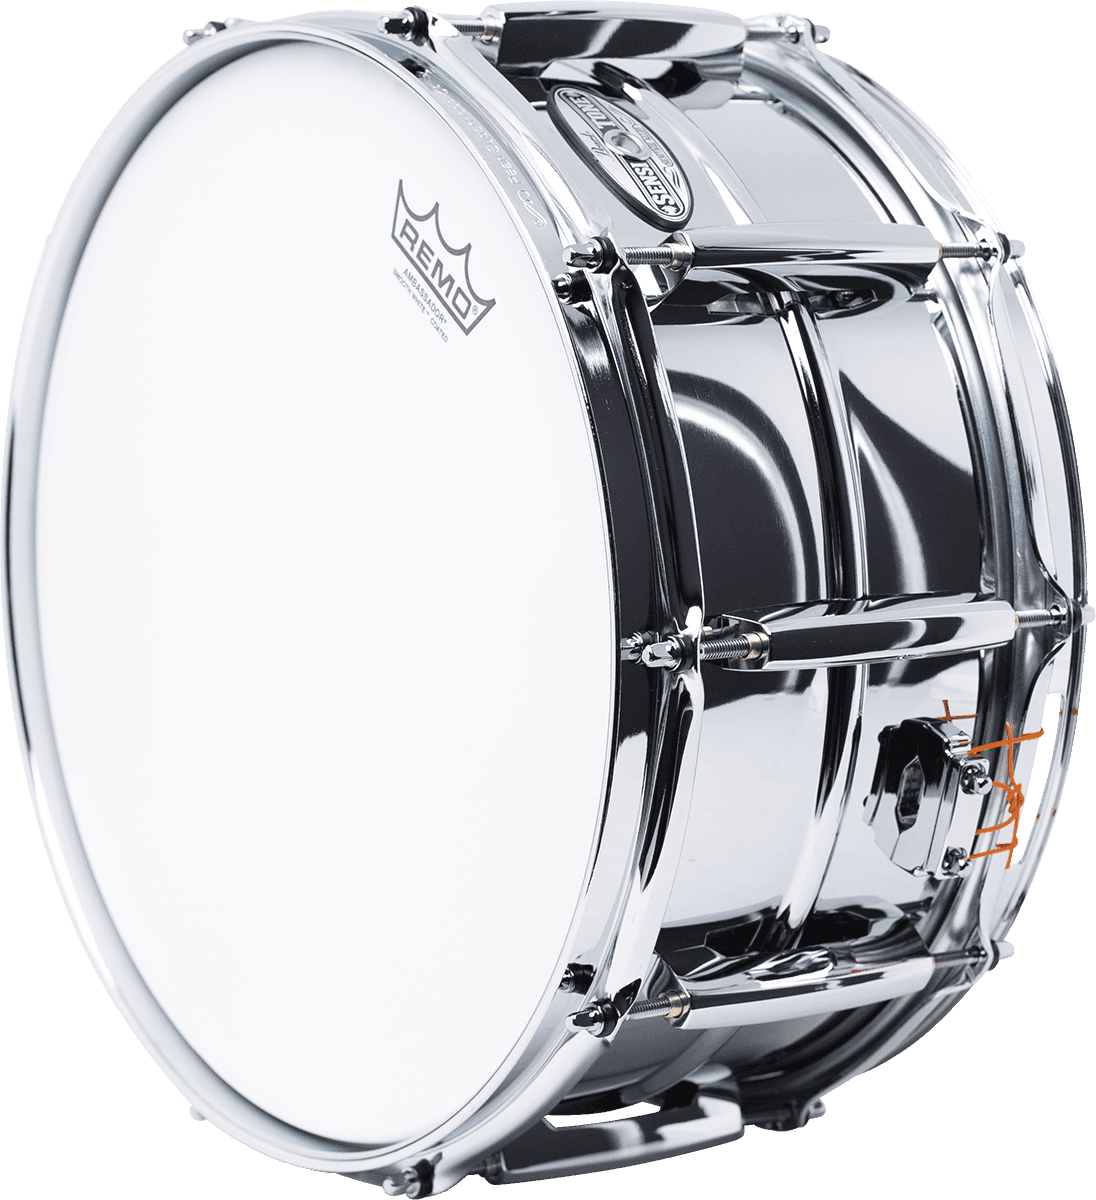 Pearl Sth1465s Sensitone Heritage - Chrome - Snare Drums - Variation 3